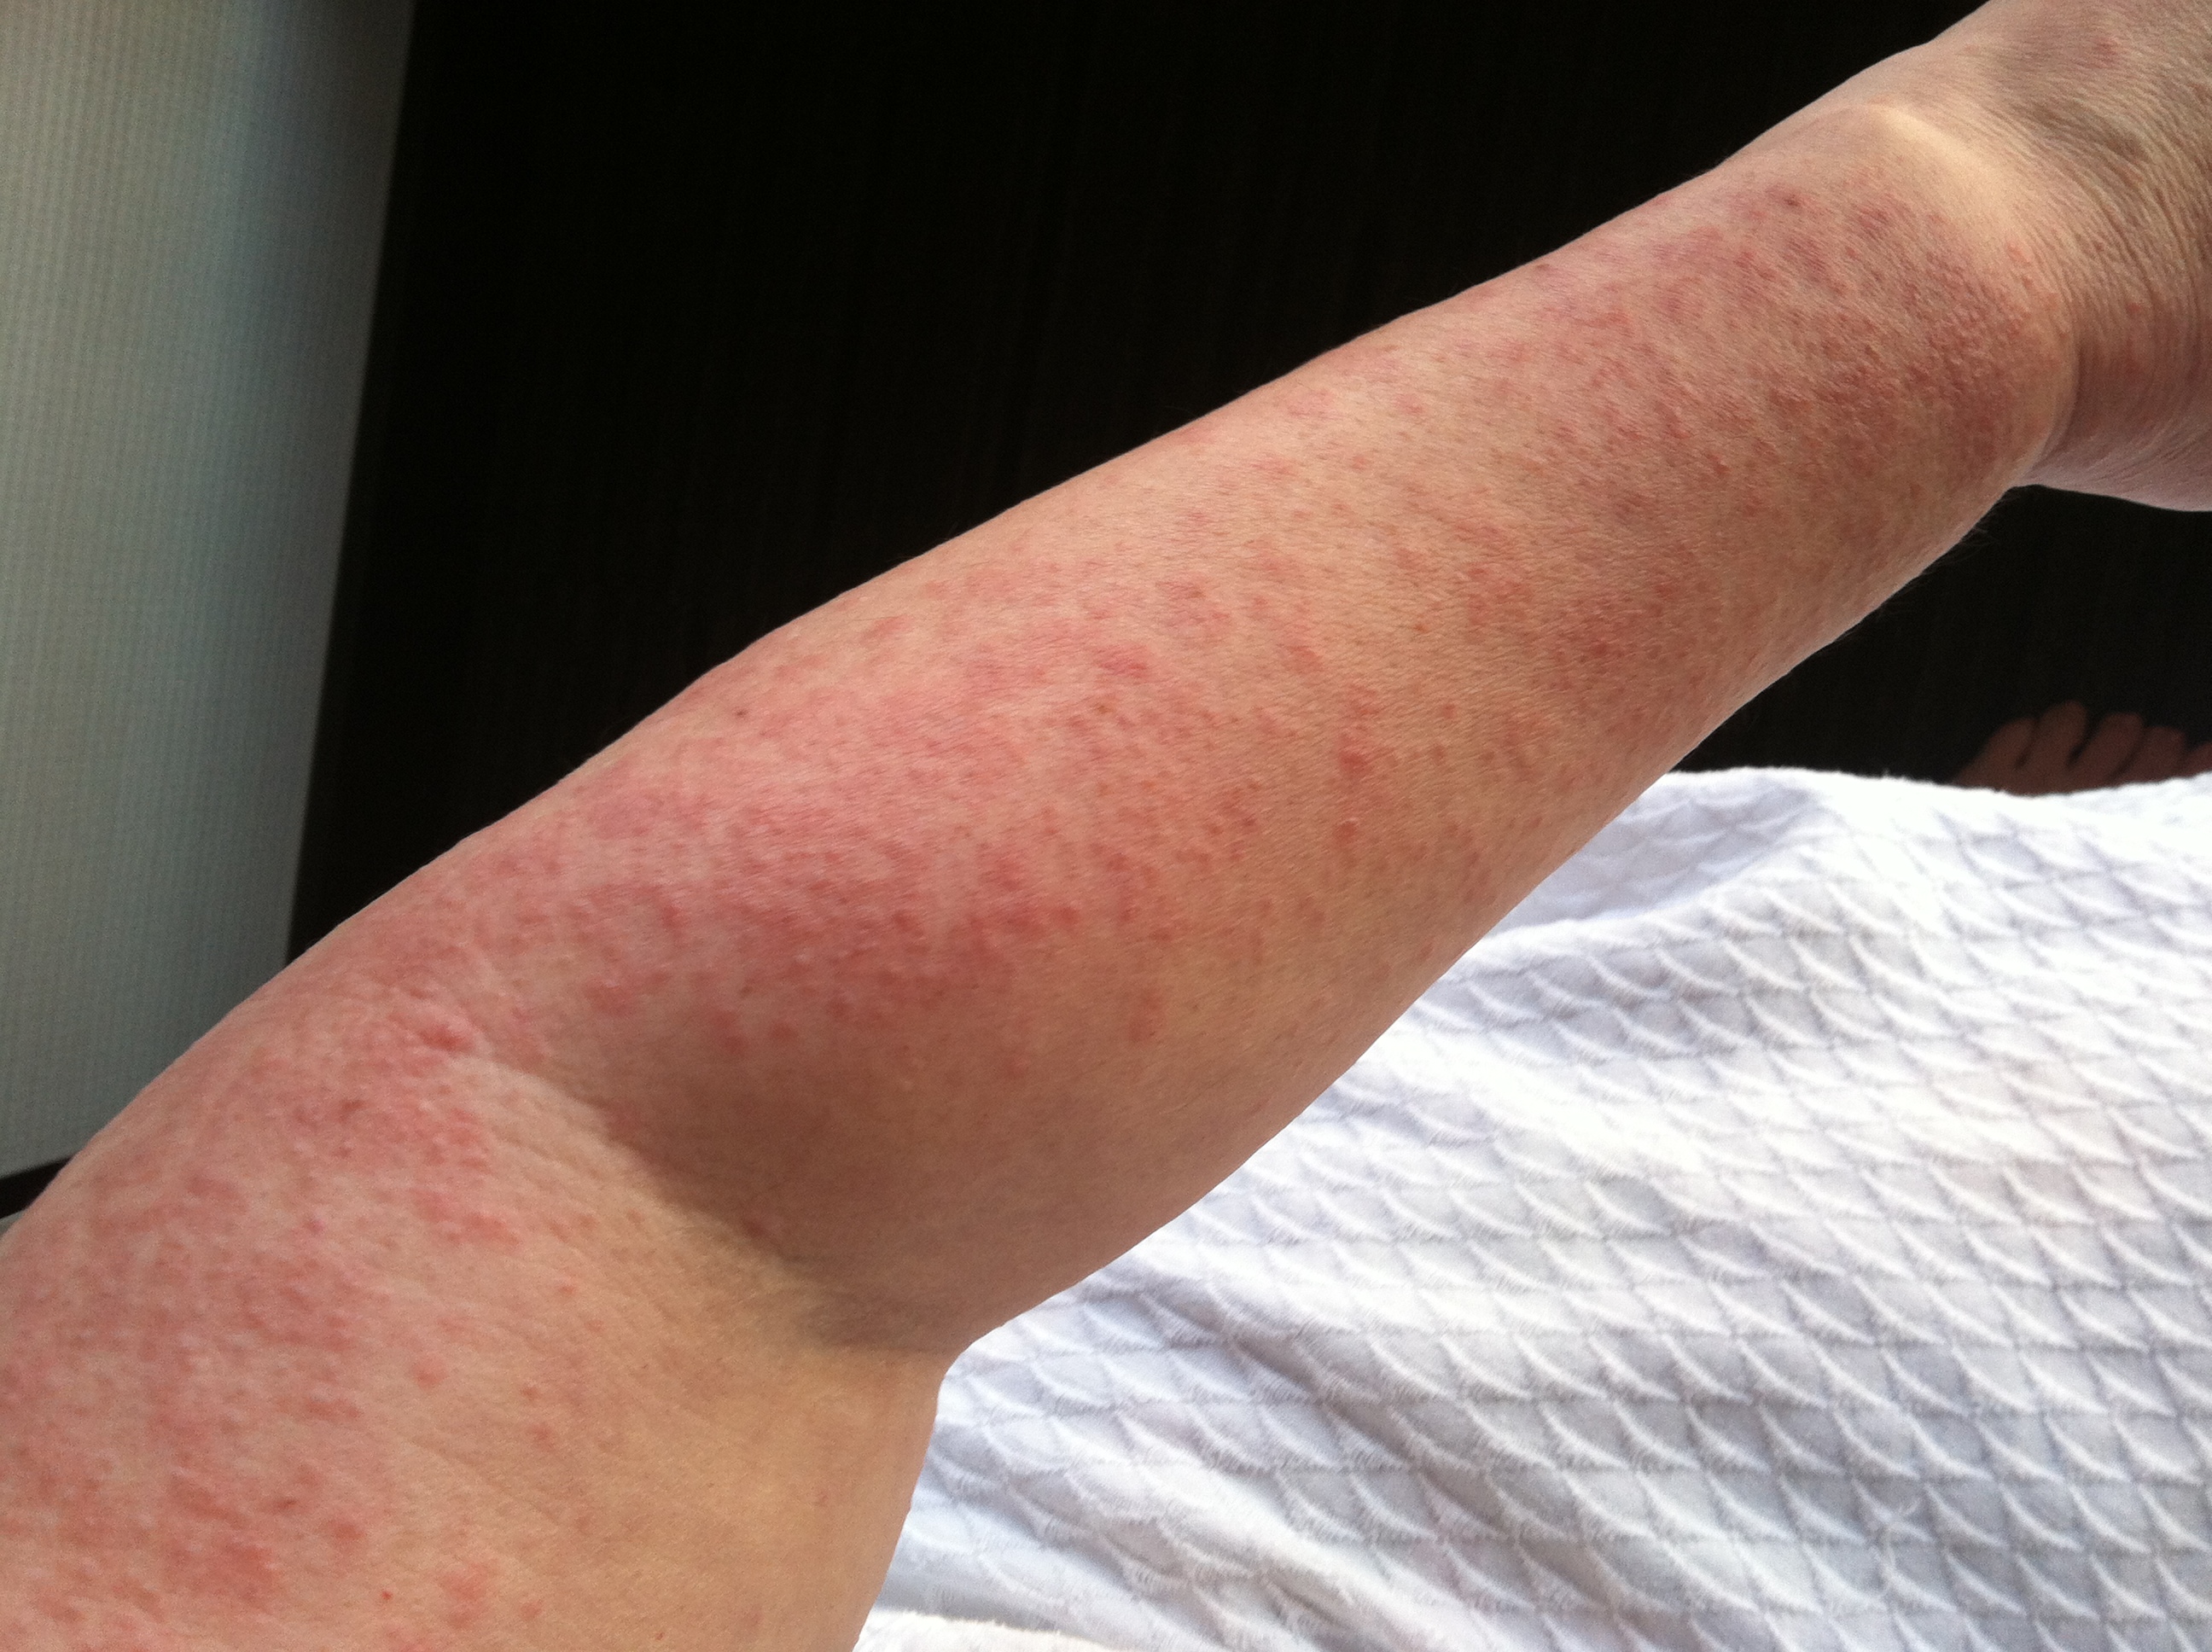 scabies rash pictures on legs - pictures, photos